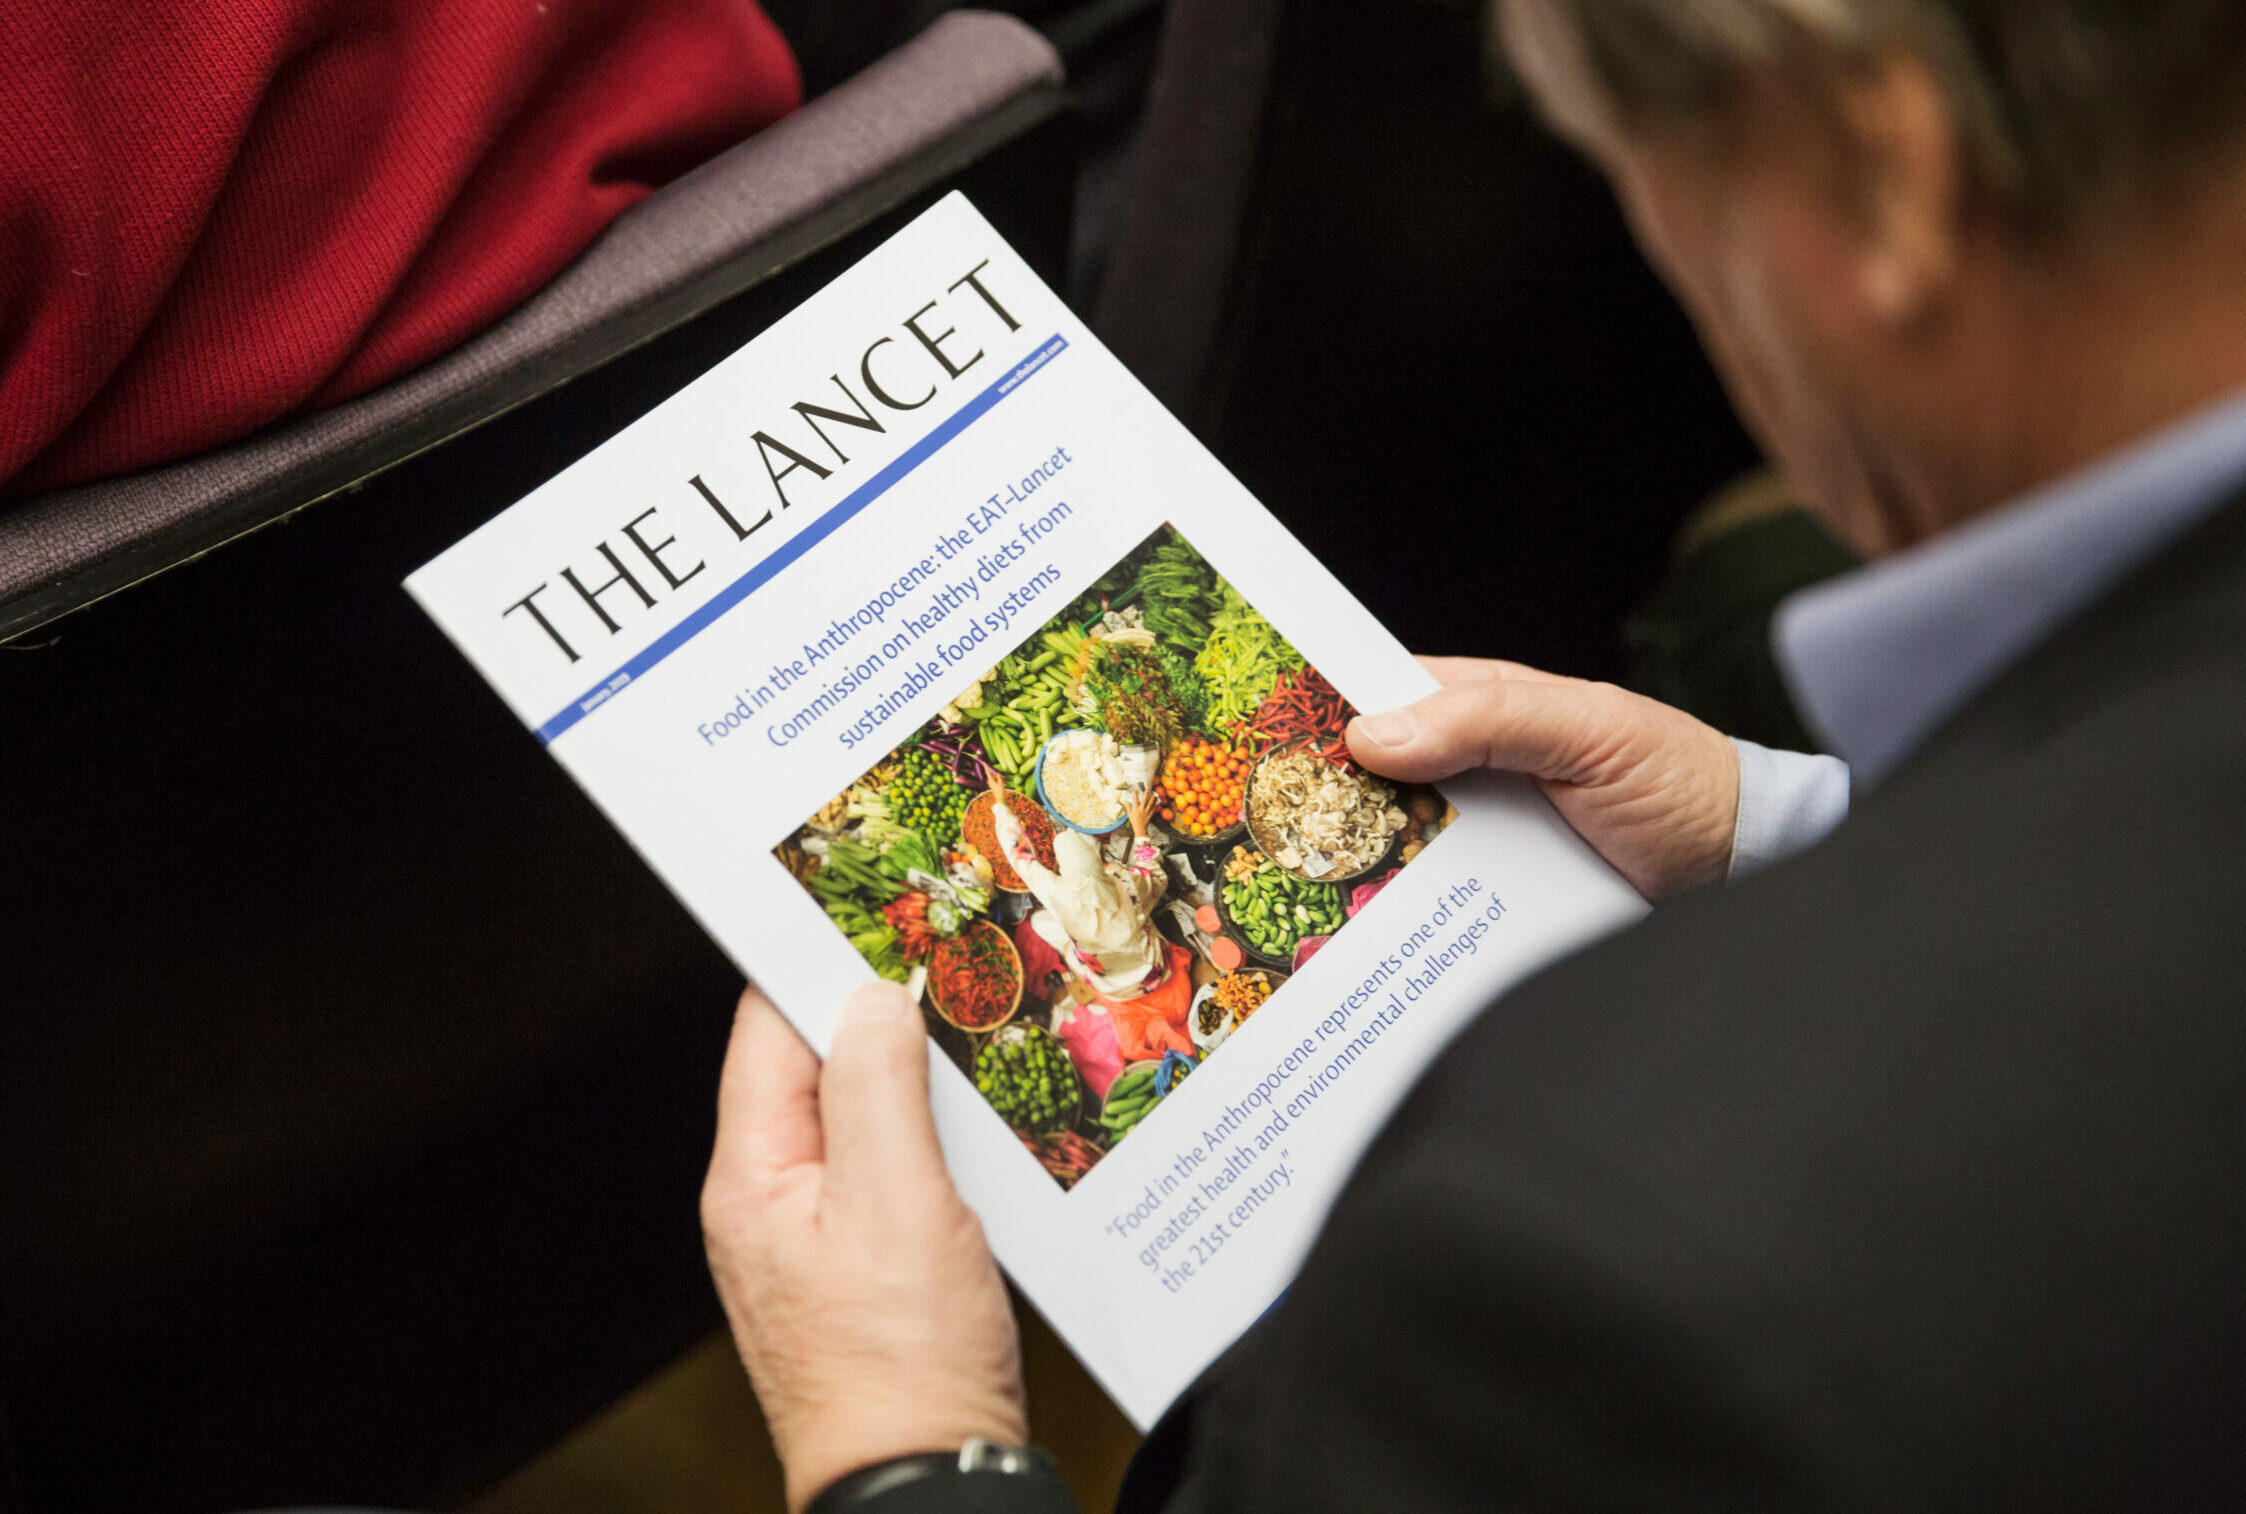 EAT-Lancet Report Among the Worlds Most Cited [Video]